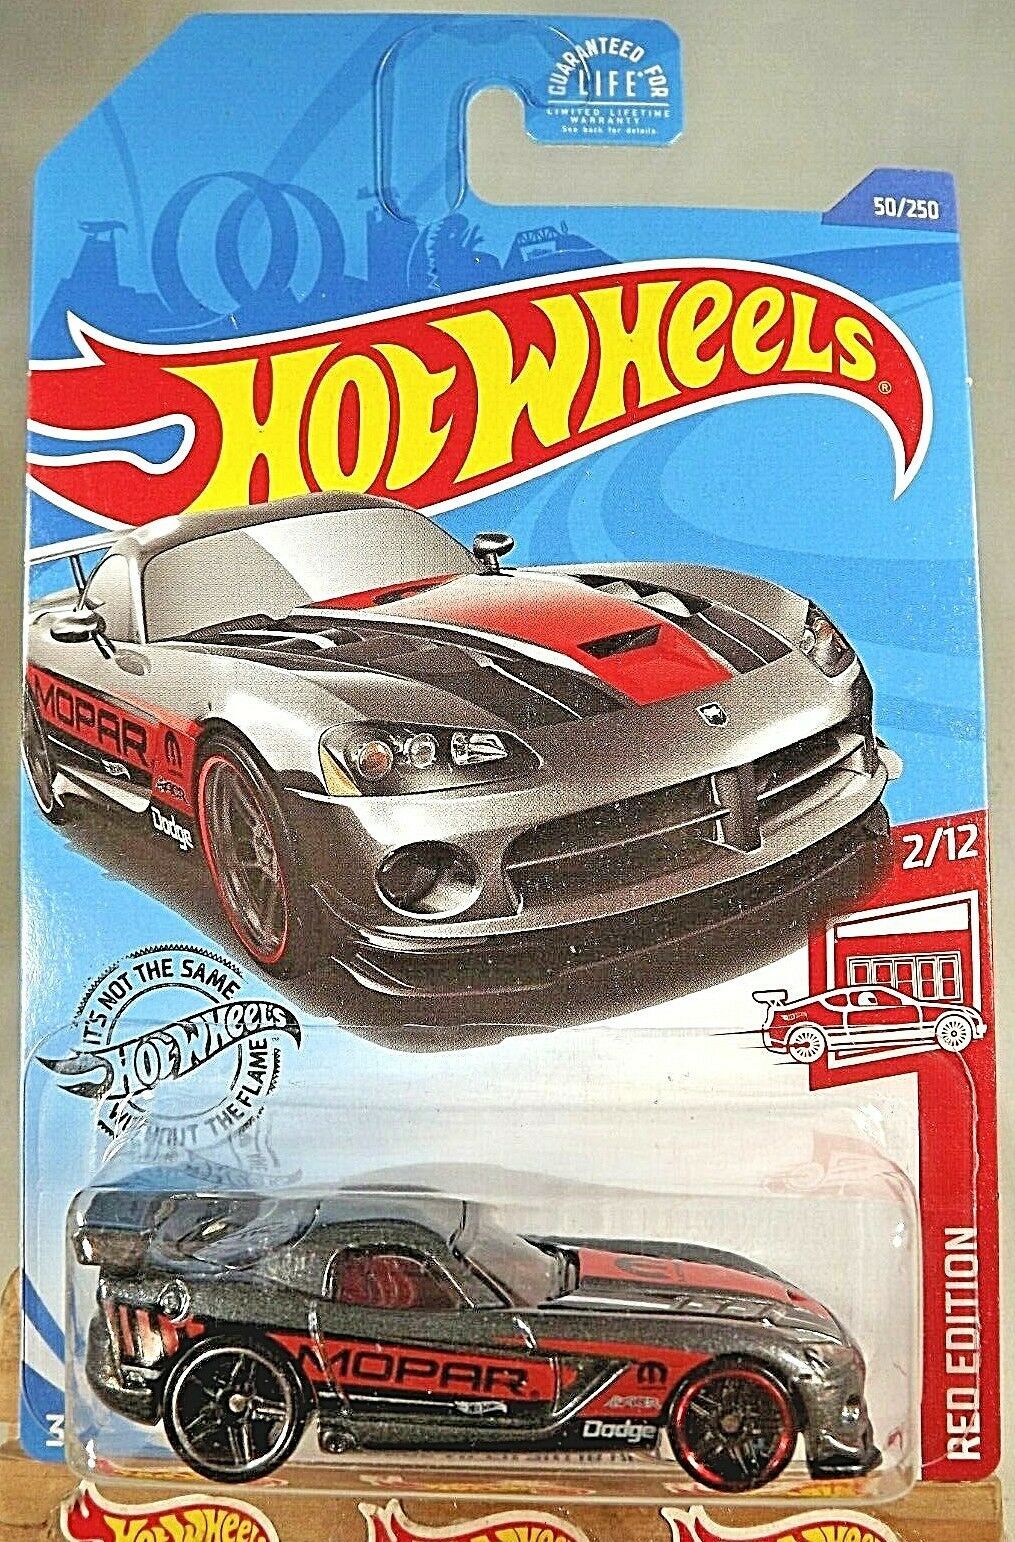 2020 Hot Wheels Target Exclusive 50 Red Edition 2/12 DODGE VIPER SRT10